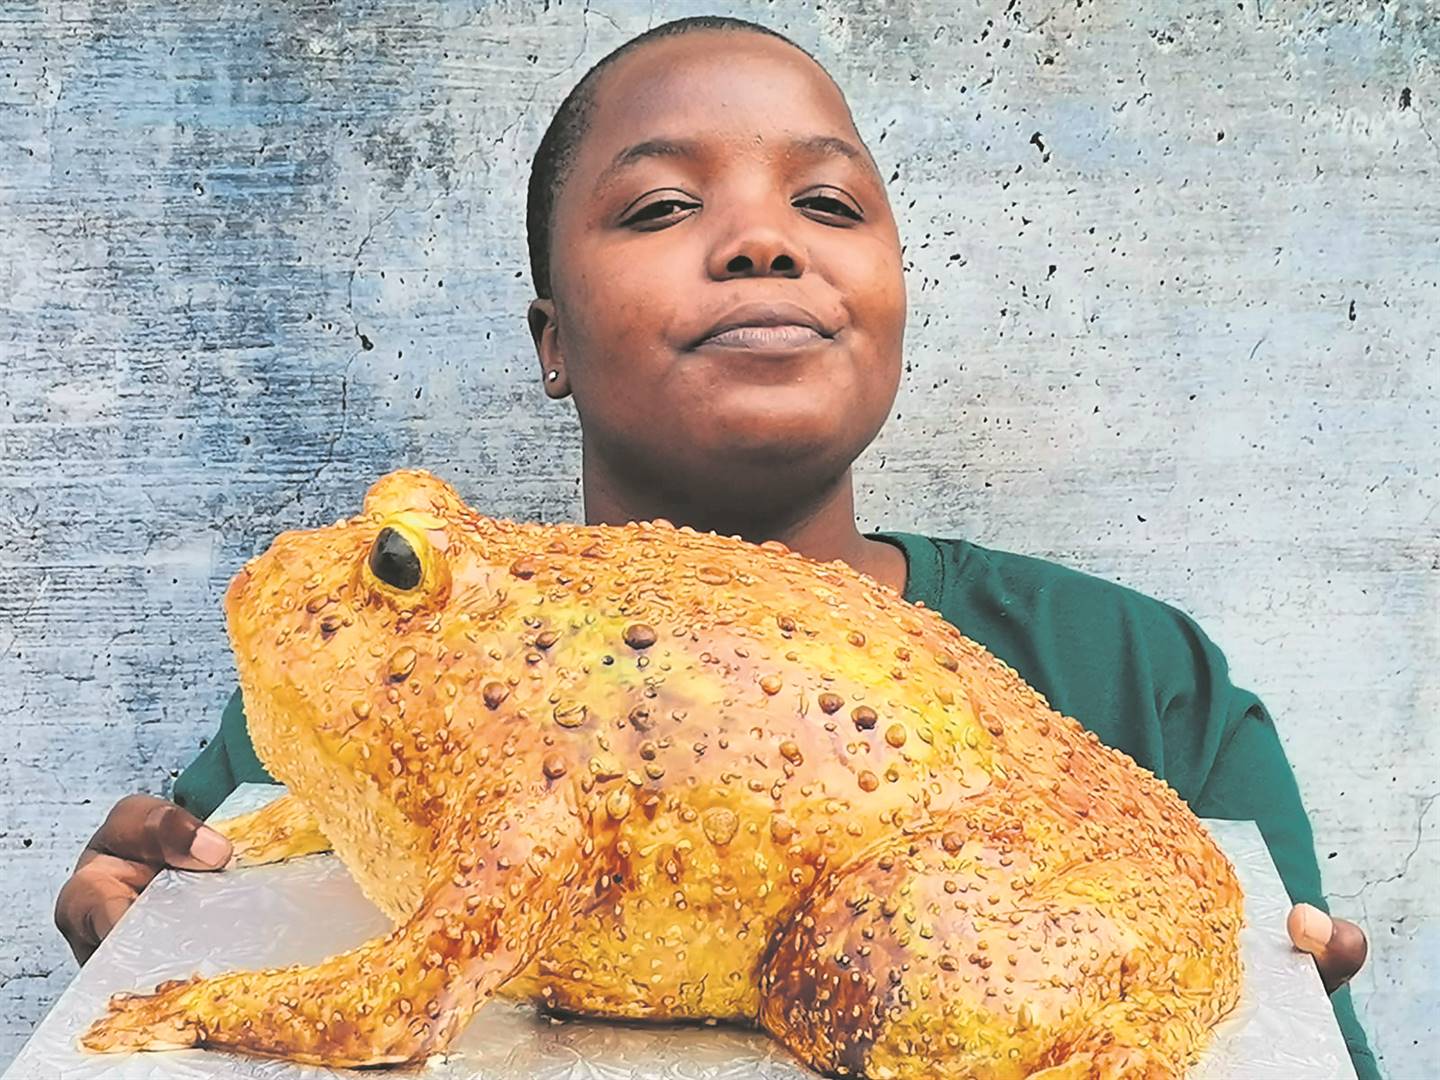 Cake artist Kurhula Makhuvele said people can’t stop talking about her cakes, which are inspired by brands, food, animals and everyday objects. 